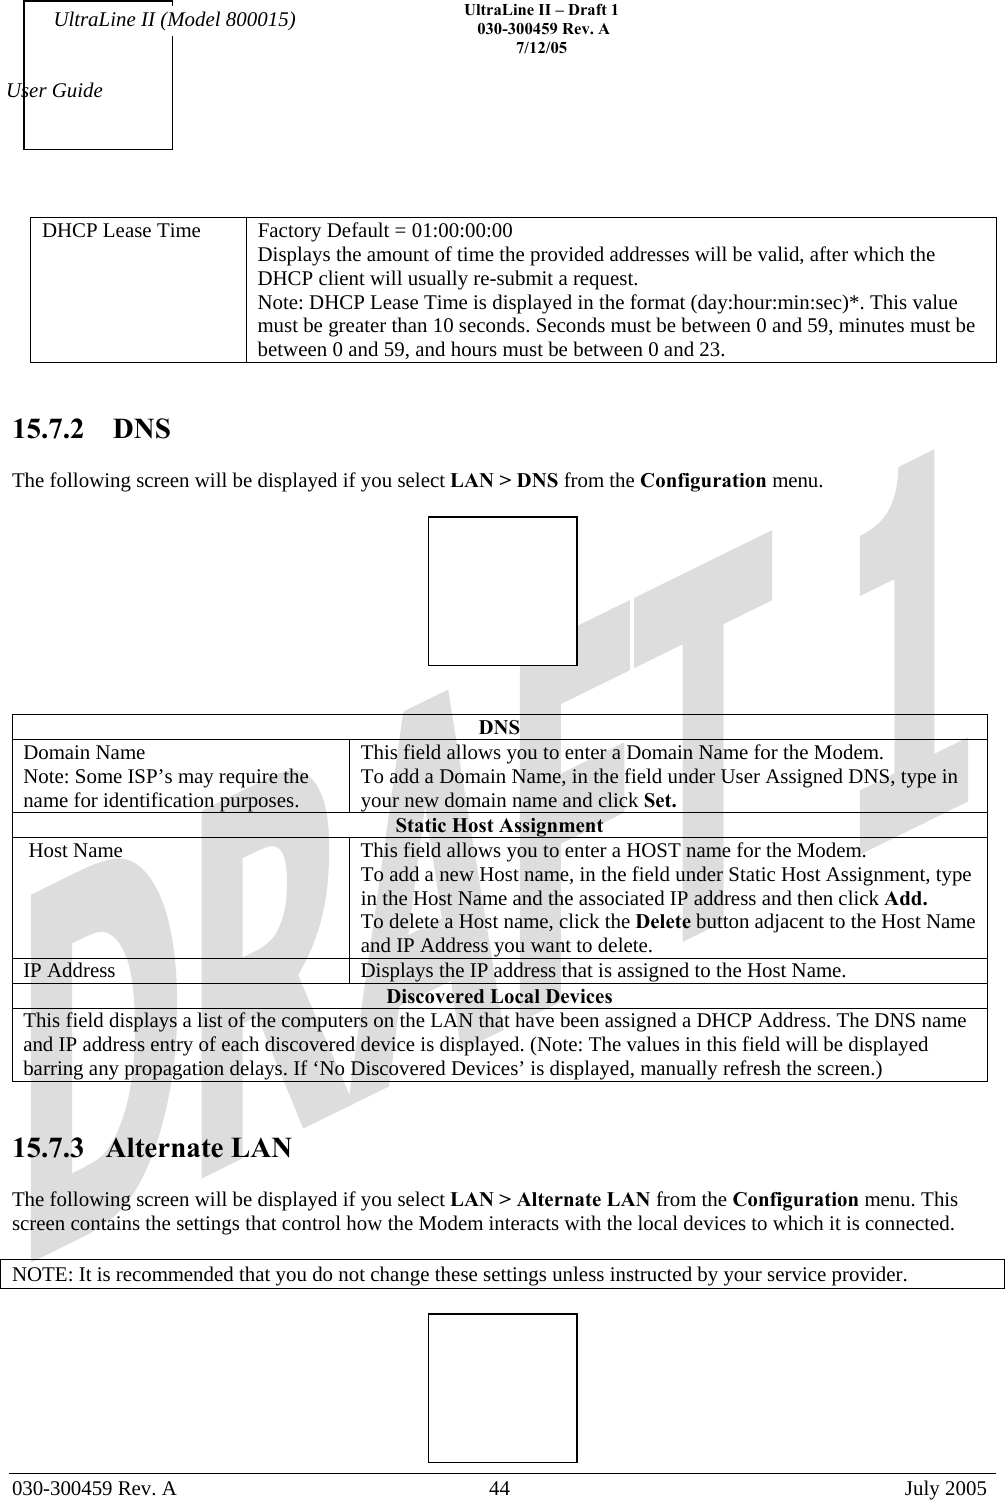    UltraLine II – Draft 1   030-300459 Rev. A 7/12/05   030-300459 Rev. A  44  July 2005  User Guide UltraLine II (Model 800015) DHCP Lease Time  Factory Default = 01:00:00:00  Displays the amount of time the provided addresses will be valid, after which the DHCP client will usually re-submit a request. Note: DHCP Lease Time is displayed in the format (day:hour:min:sec)*. This value must be greater than 10 seconds. Seconds must be between 0 and 59, minutes must be between 0 and 59, and hours must be between 0 and 23.     15.7.2  DNS  The following screen will be displayed if you select LAN &gt; DNS from the Configuration menu.      DNS Domain Name Note: Some ISP’s may require the name for identification purposes. This field allows you to enter a Domain Name for the Modem. To add a Domain Name, in the field under User Assigned DNS, type in your new domain name and click Set. Static Host Assignment  Host Name  This field allows you to enter a HOST name for the Modem. To add a new Host name, in the field under Static Host Assignment, type in the Host Name and the associated IP address and then click Add. To delete a Host name, click the Delete button adjacent to the Host Name and IP Address you want to delete.  IP Address  Displays the IP address that is assigned to the Host Name. Discovered Local Devices This field displays a list of the computers on the LAN that have been assigned a DHCP Address. The DNS name and IP address entry of each discovered device is displayed. (Note: The values in this field will be displayed barring any propagation delays. If ‘No Discovered Devices’ is displayed, manually refresh the screen.)   15.7.3 Alternate LAN  The following screen will be displayed if you select LAN &gt; Alternate LAN from the Configuration menu. This screen contains the settings that control how the Modem interacts with the local devices to which it is connected.  NOTE: It is recommended that you do not change these settings unless instructed by your service provider.   